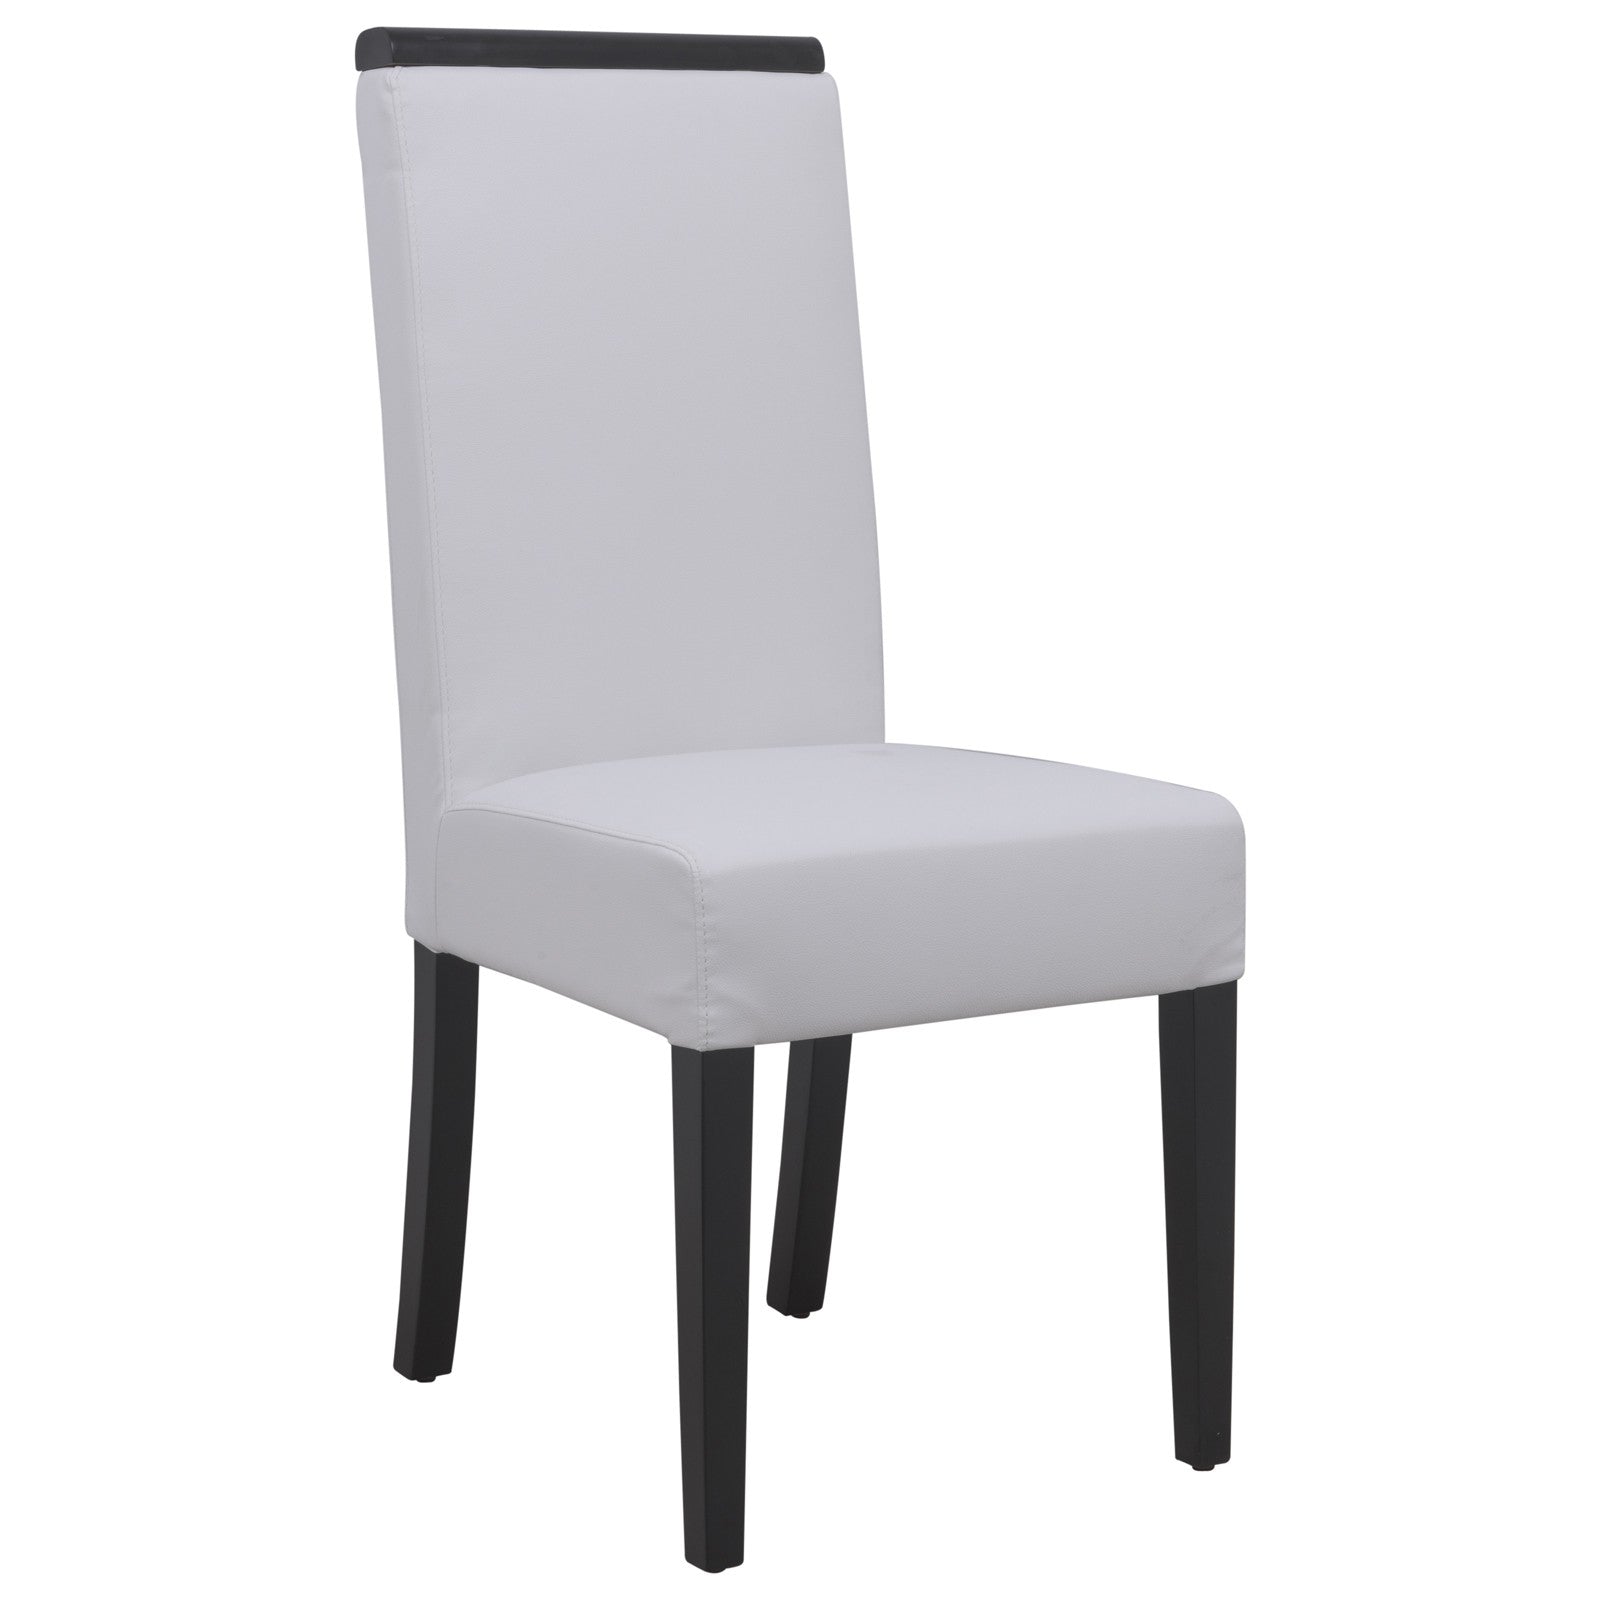 Elyse White Vinyl Leather Dining Chair - living-essentials